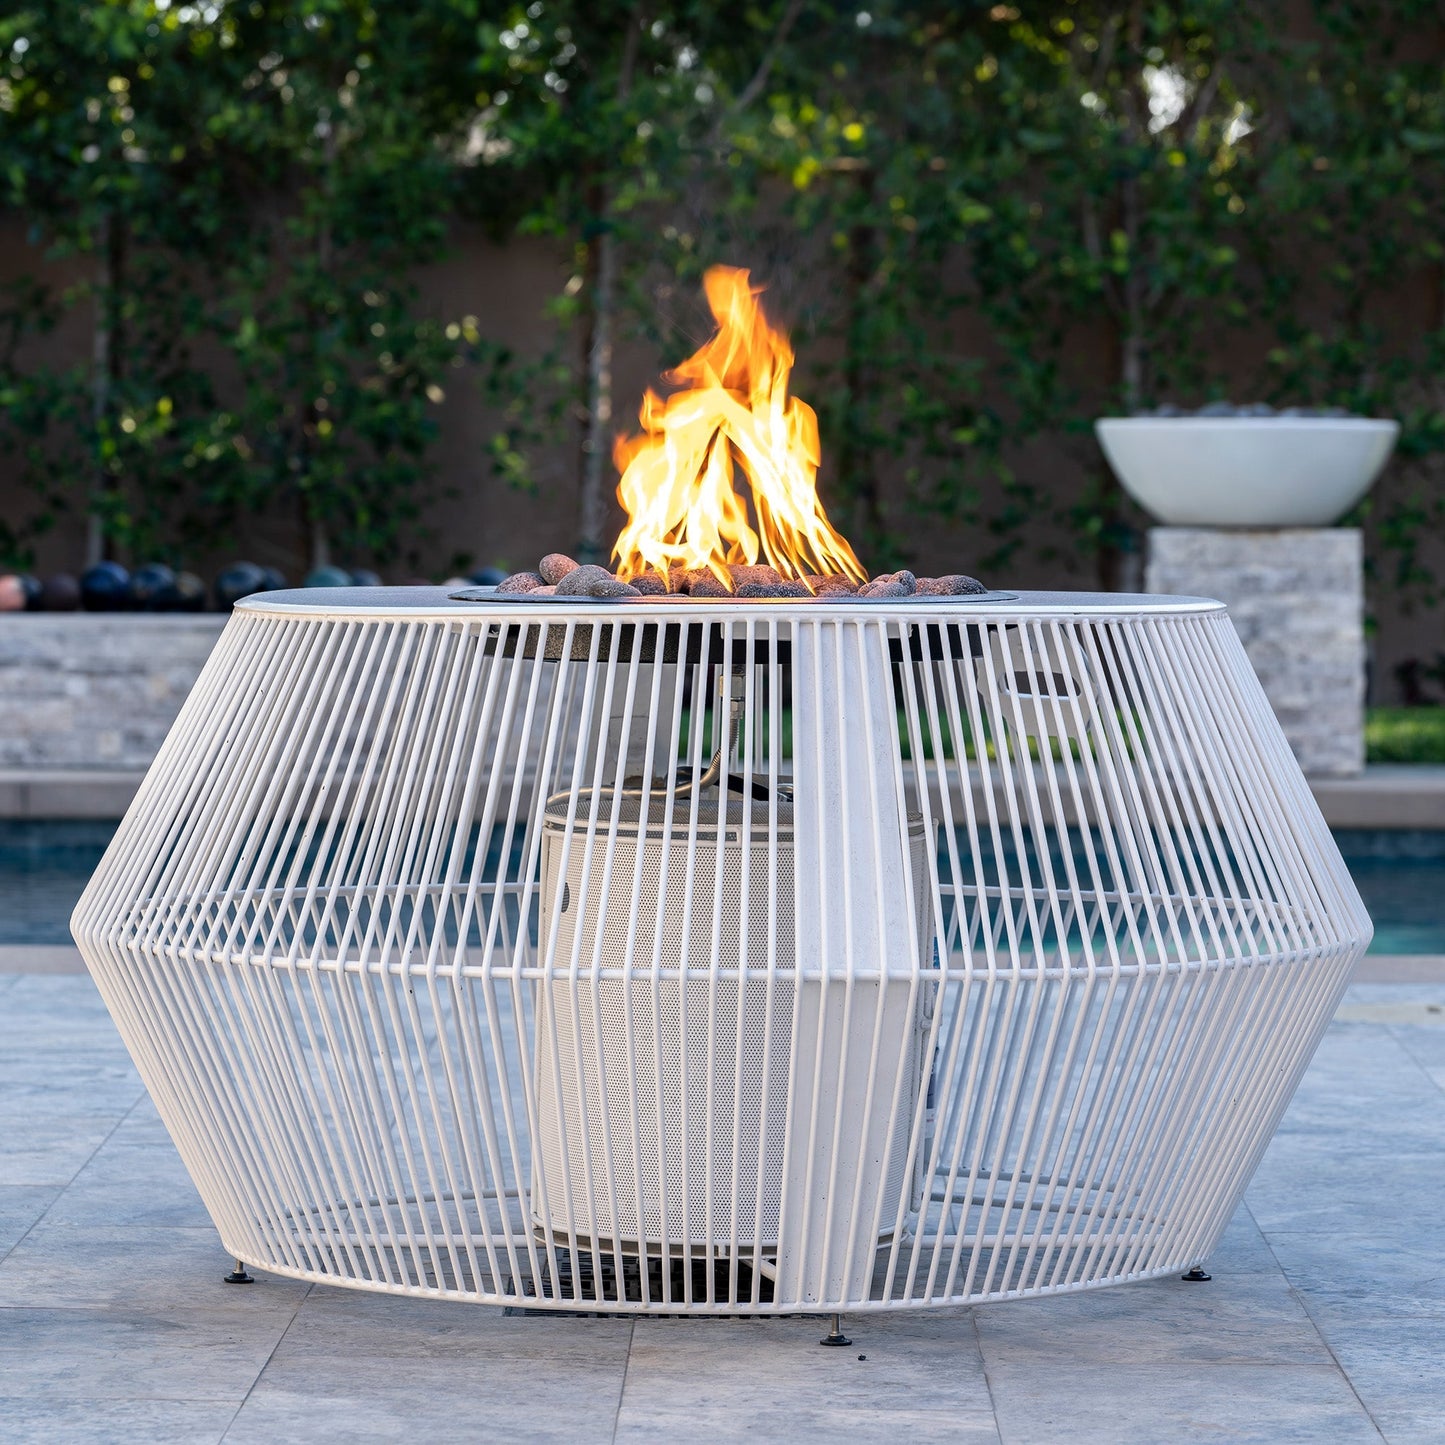 The Outdoor Plus Cesto Fire Pit